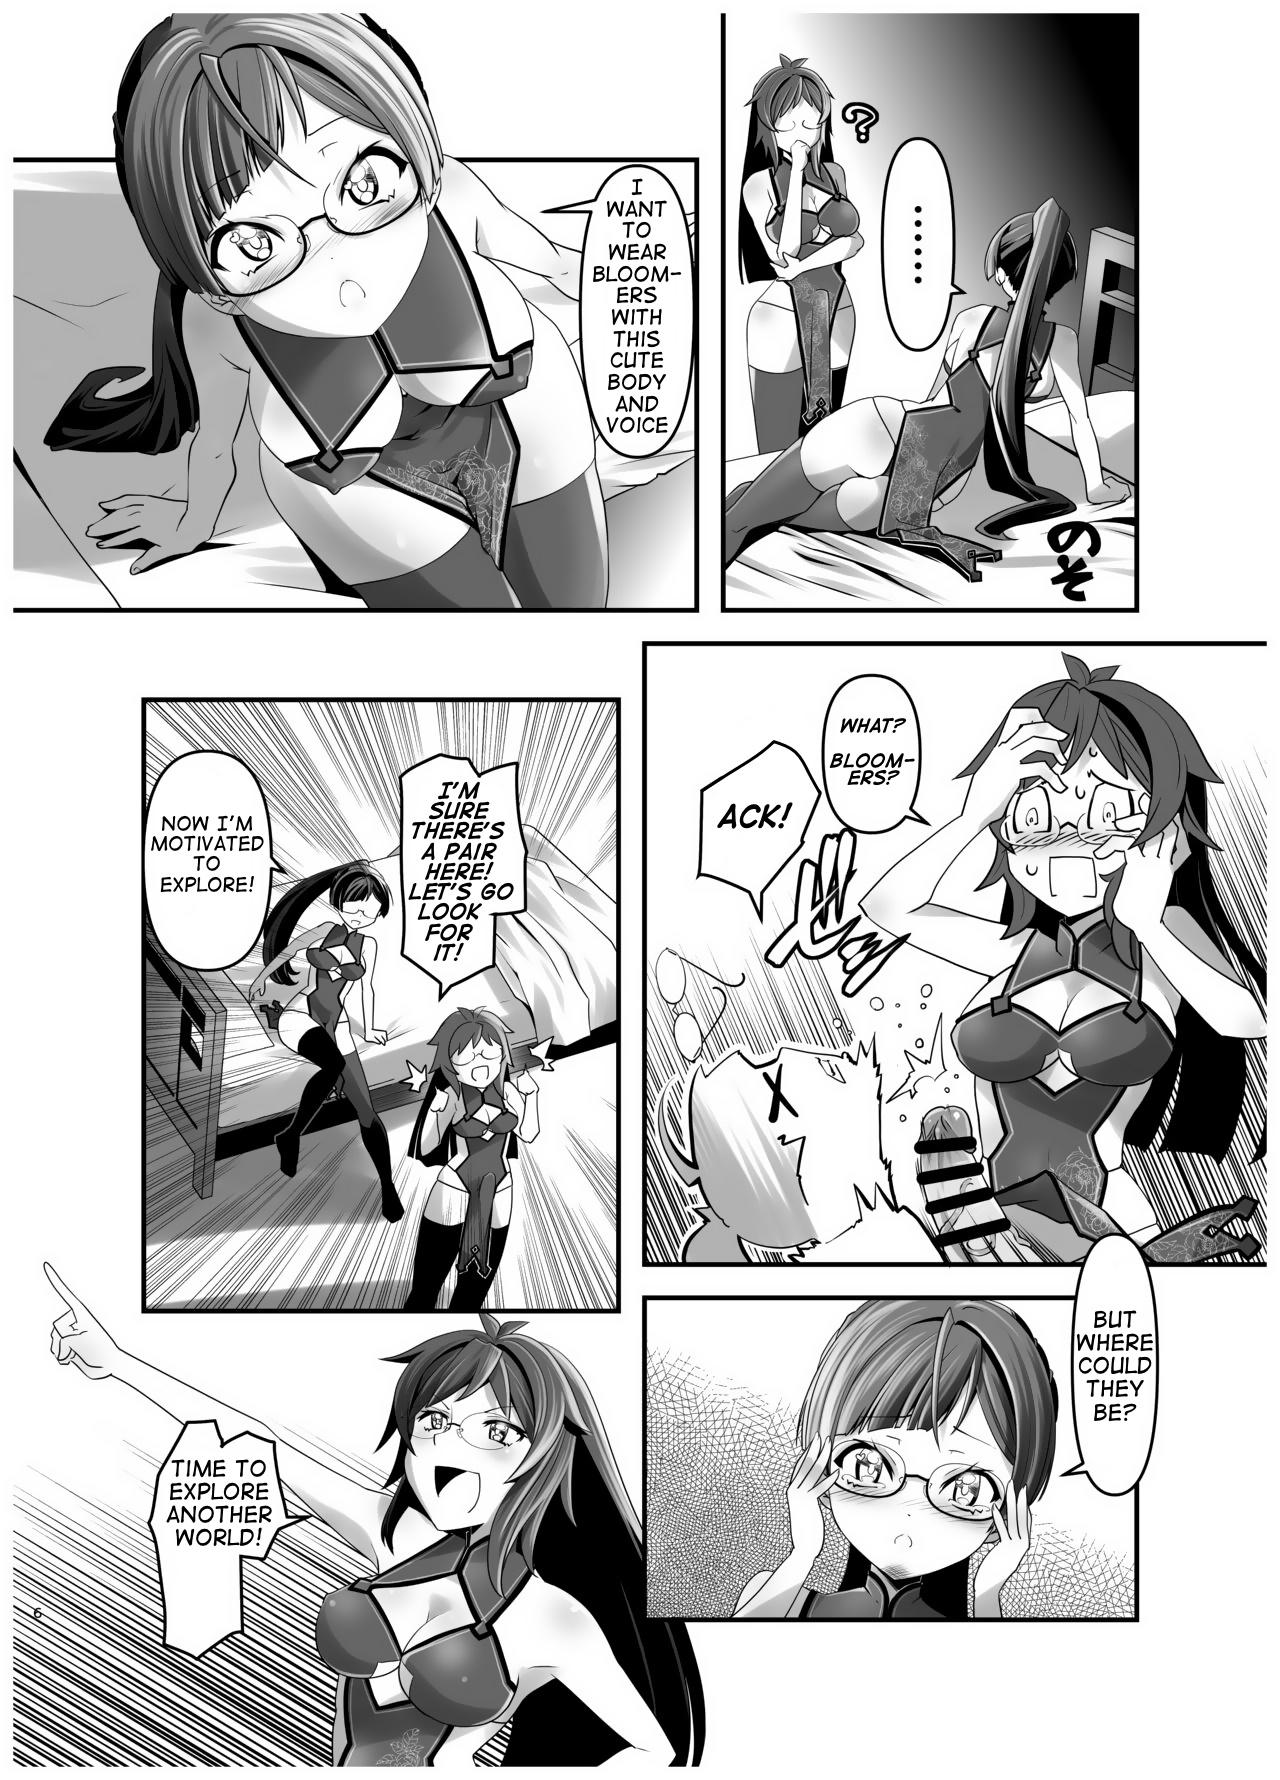 Groupsex Ore ga Bunretsu shite Isekai de TS suru Hanashi 4 | The Story of How I Split Up and TS In a Different World Ch 4 Tribute - Page 5